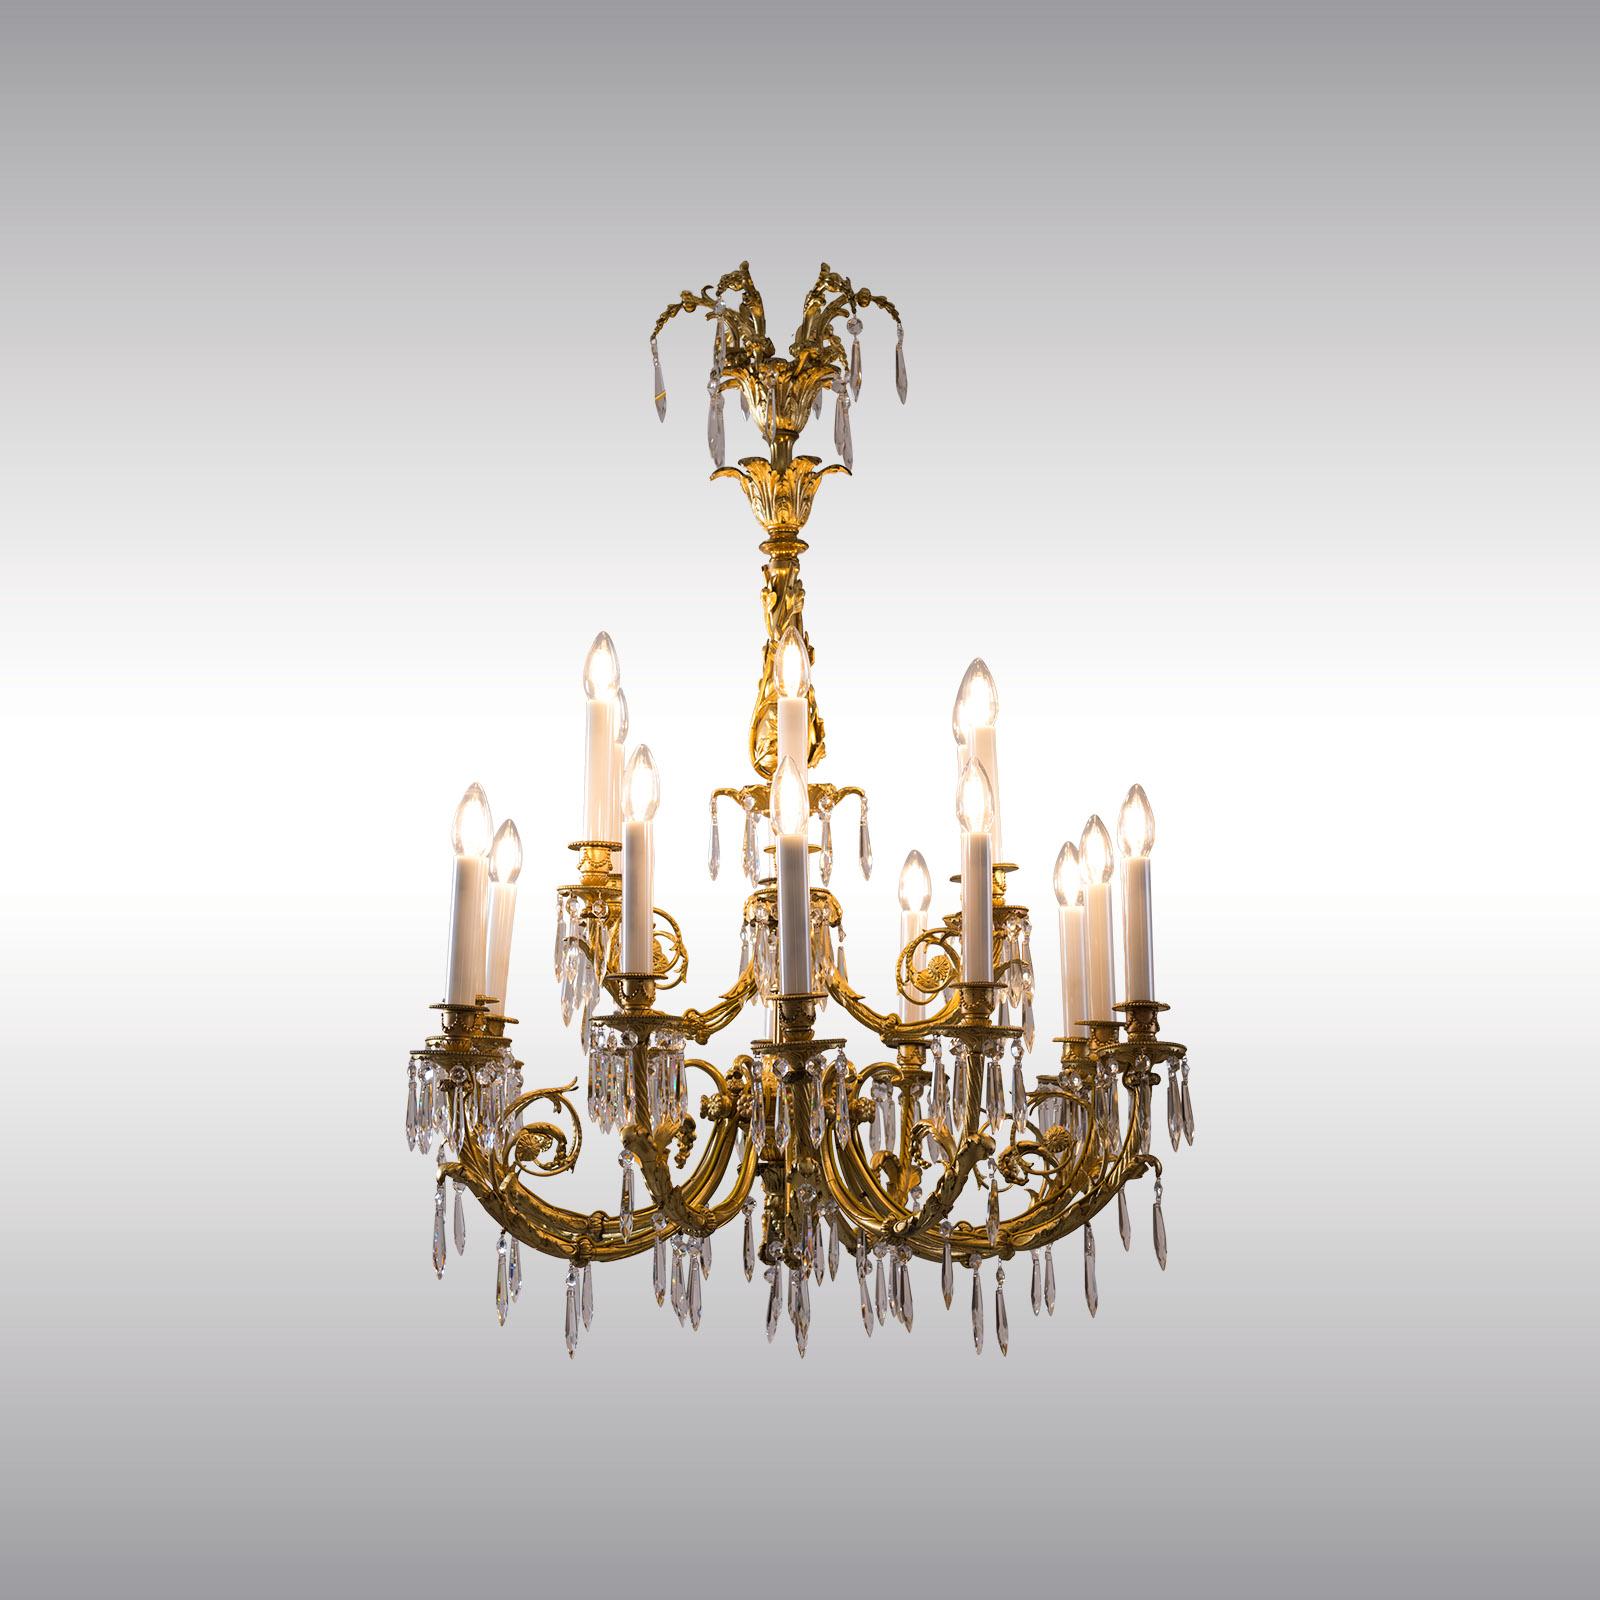 Magnificient chandelier in Baroque-style from 1880, originally for candles, later electrified. Casted, chased and gildet brass, excellent craftswork 18 lights.

  